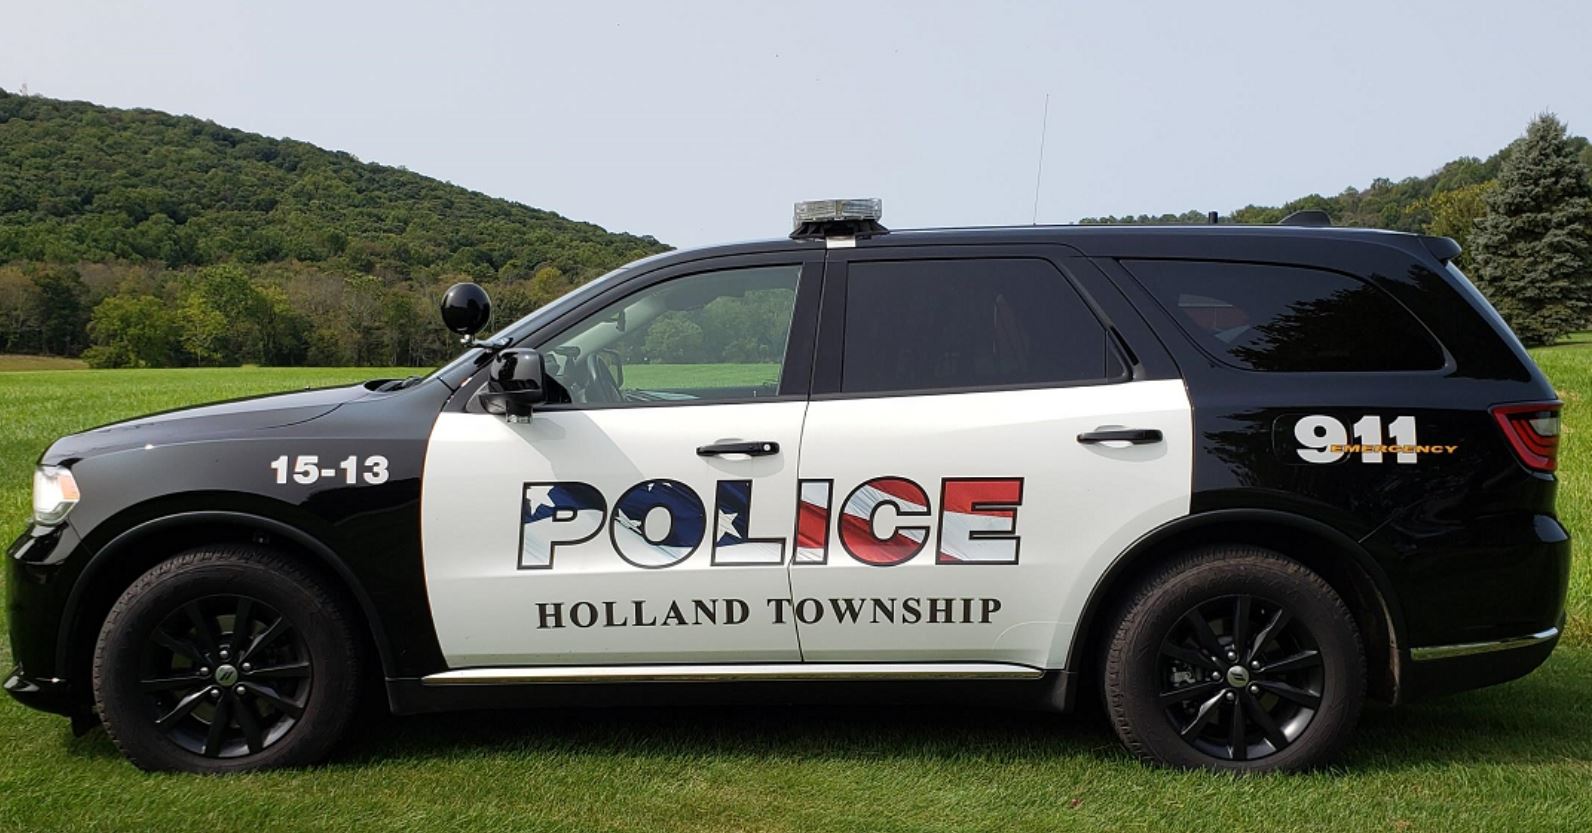 Holland Township Police Department, NJ Police Jobs